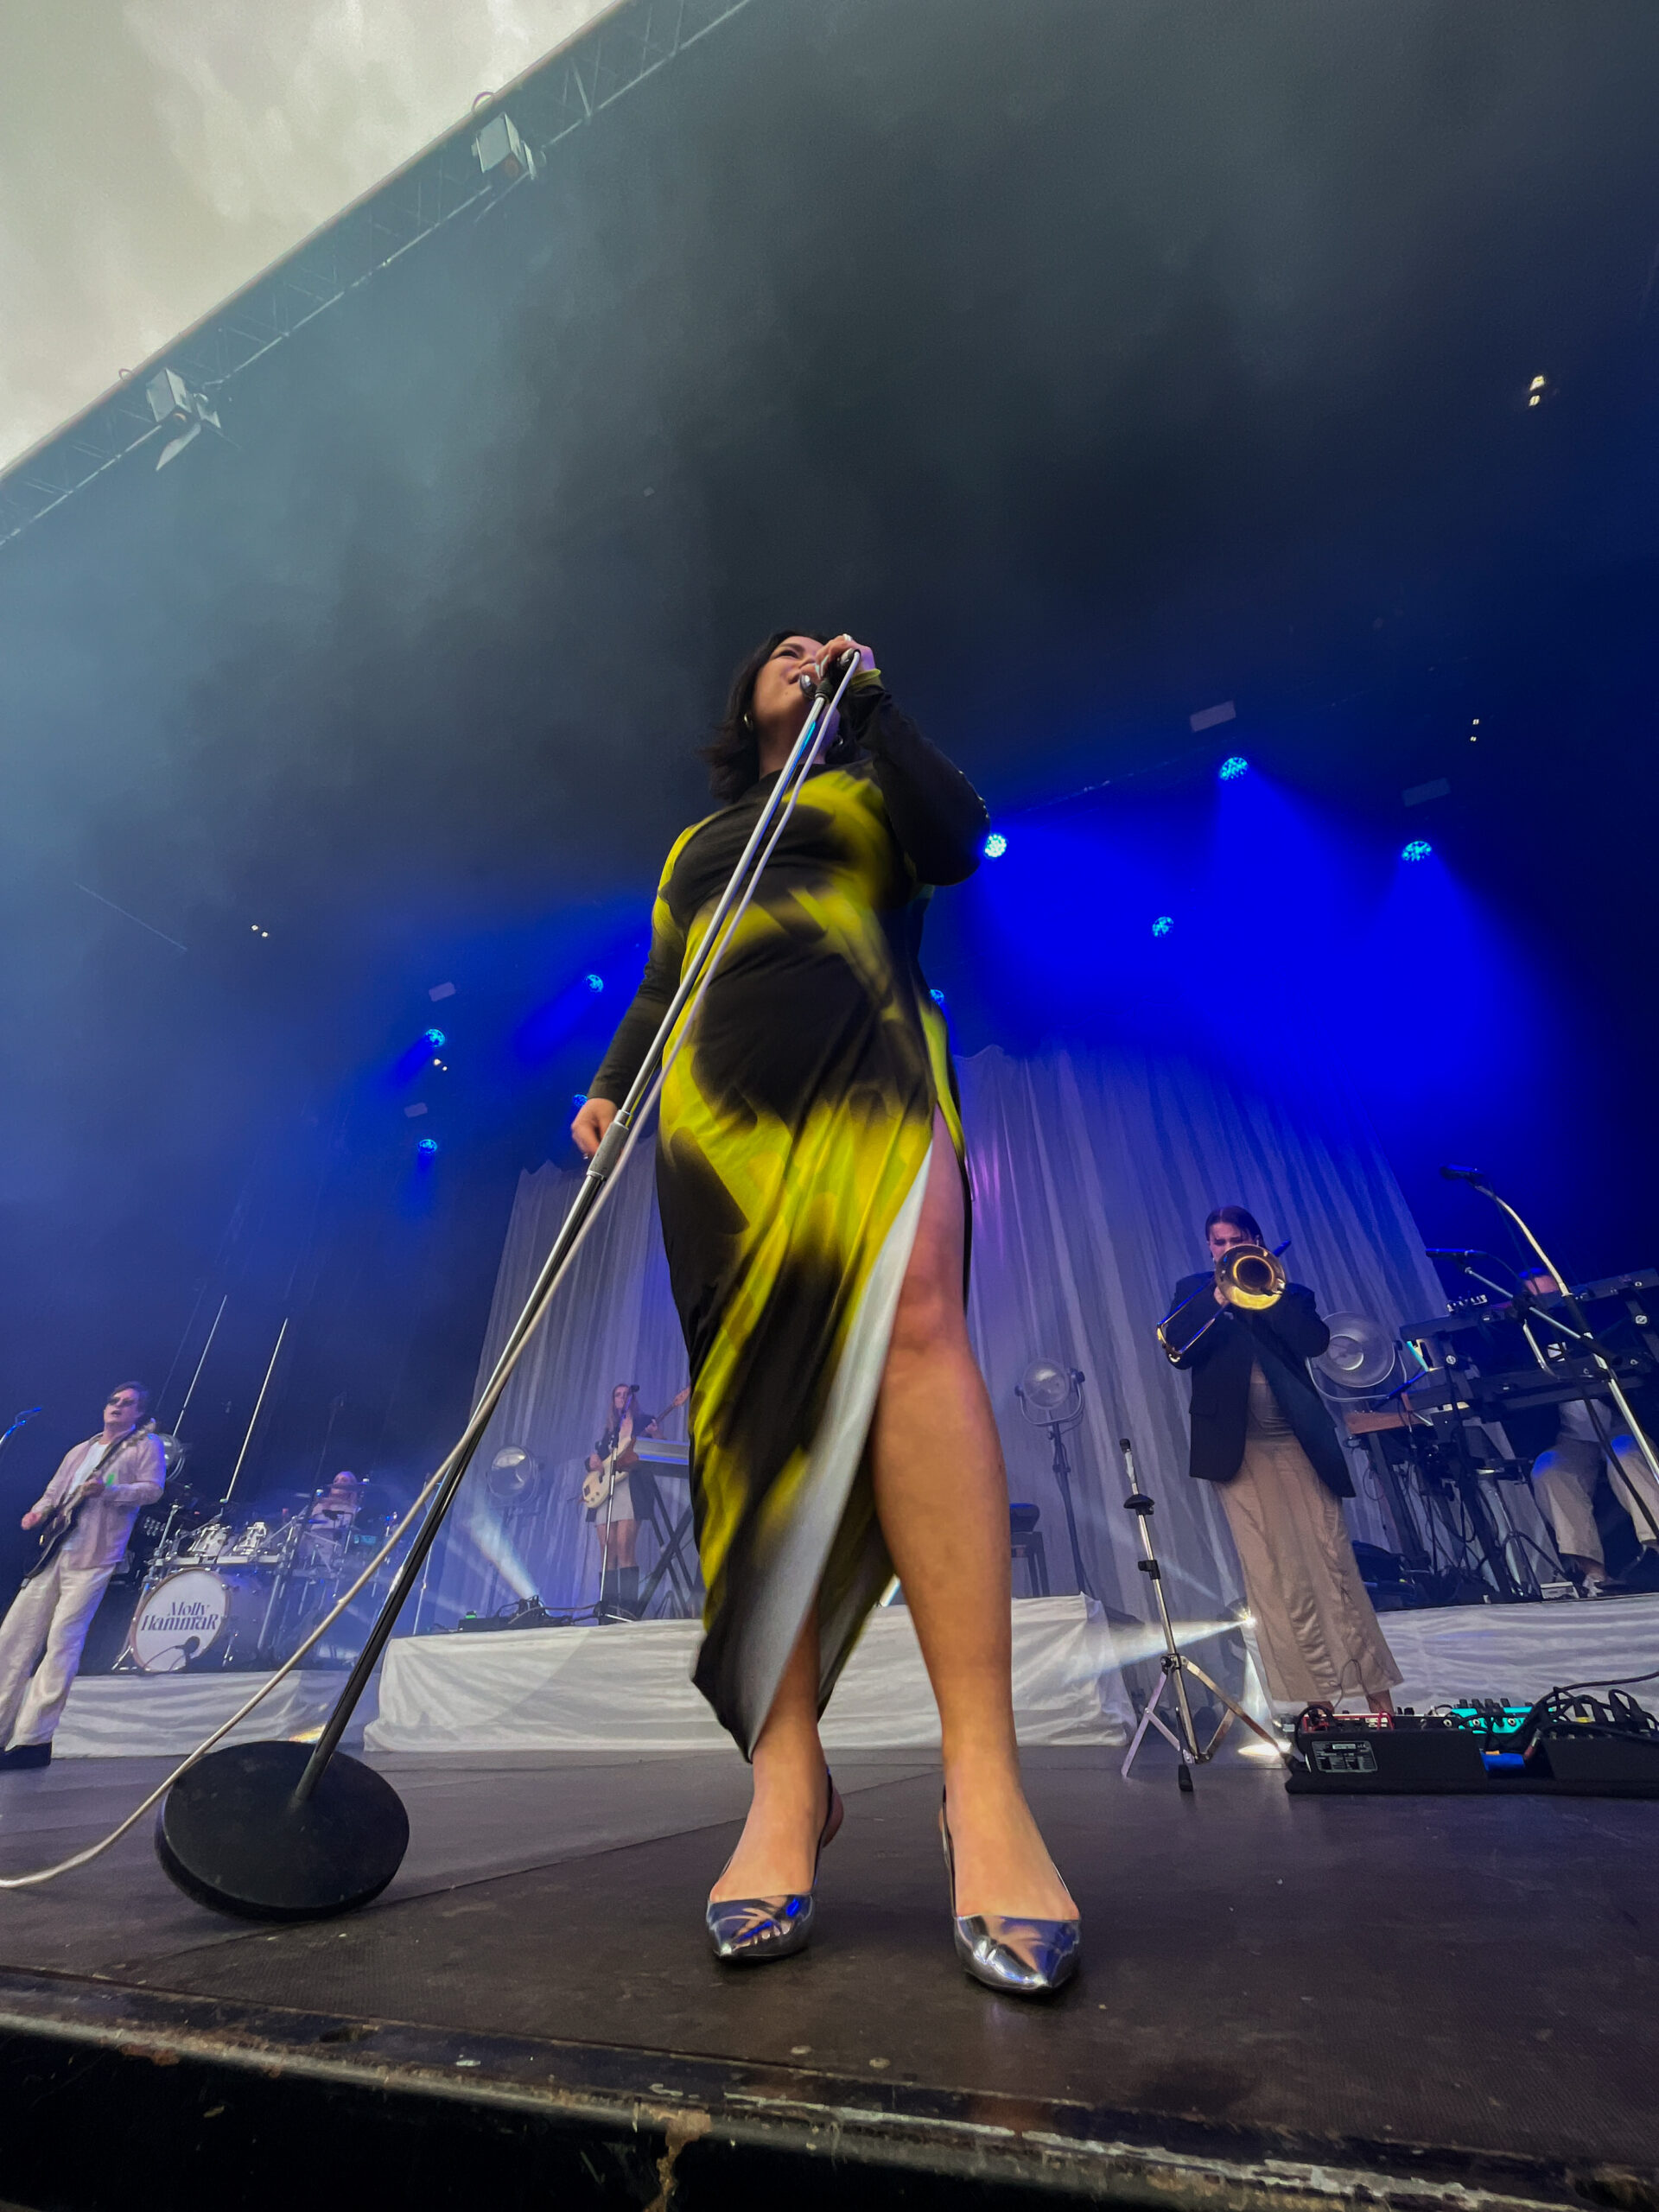 Molly Hammar performs on stage in a black and yellow long dress. She is holding a mic stand and singing. The band and the big stage can be seen in the background.